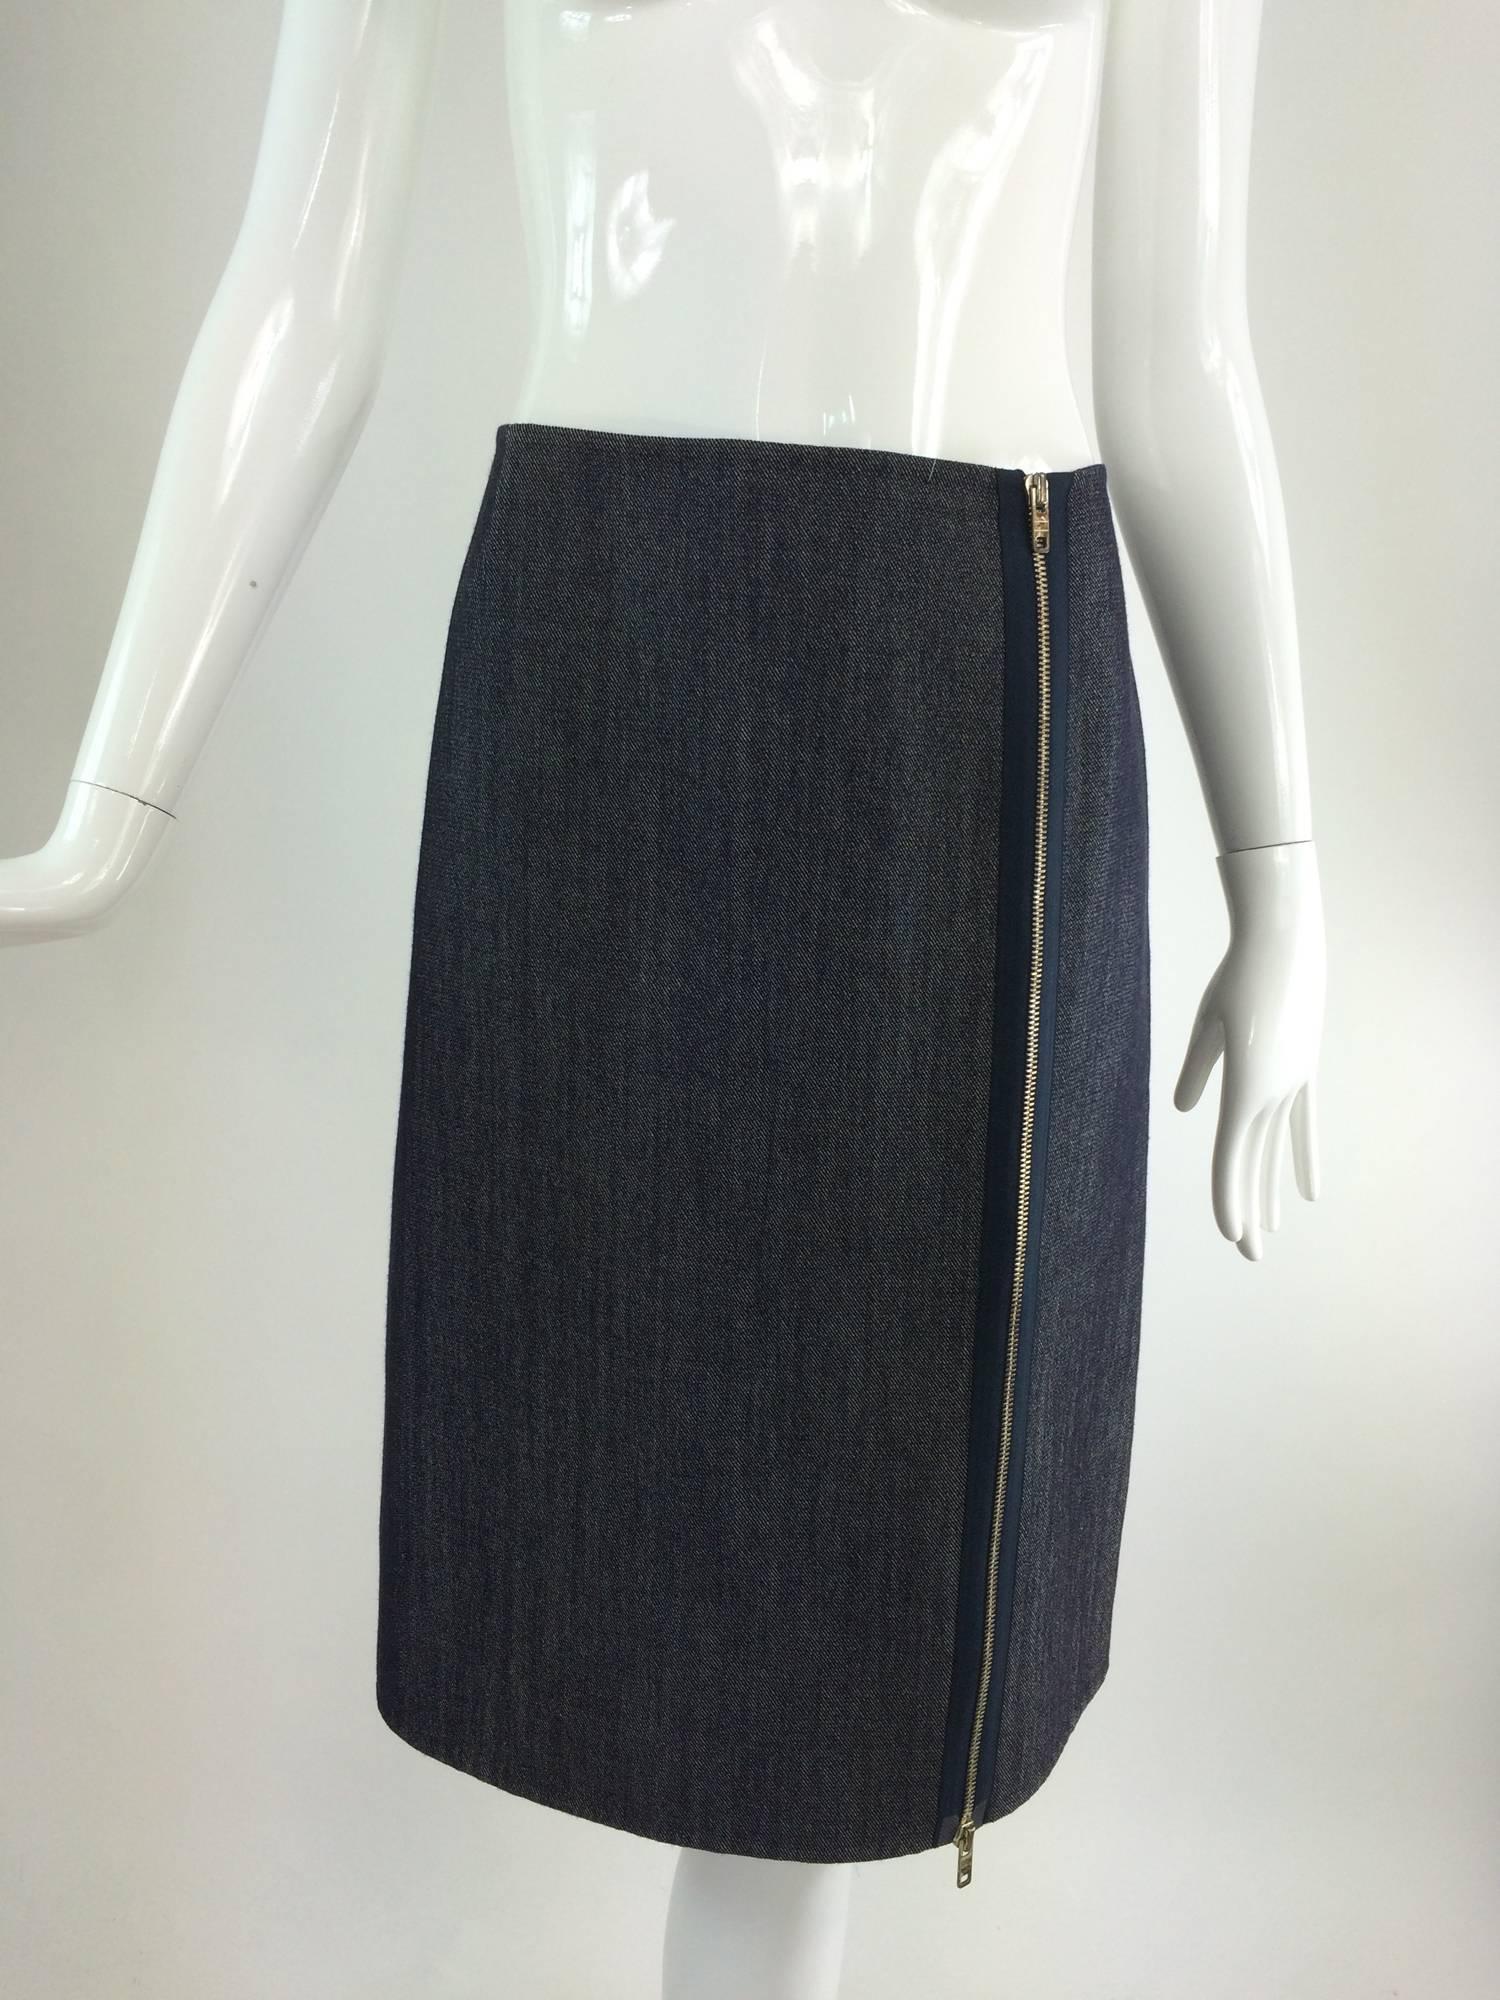 Celine finition main, zip through denim skirt...Straight shape denim skirt with a full length zip through silver metal zipper at the front side, it can be unzipped from the hem up or the waist down...Marked size 42...Looks barely, if ever,